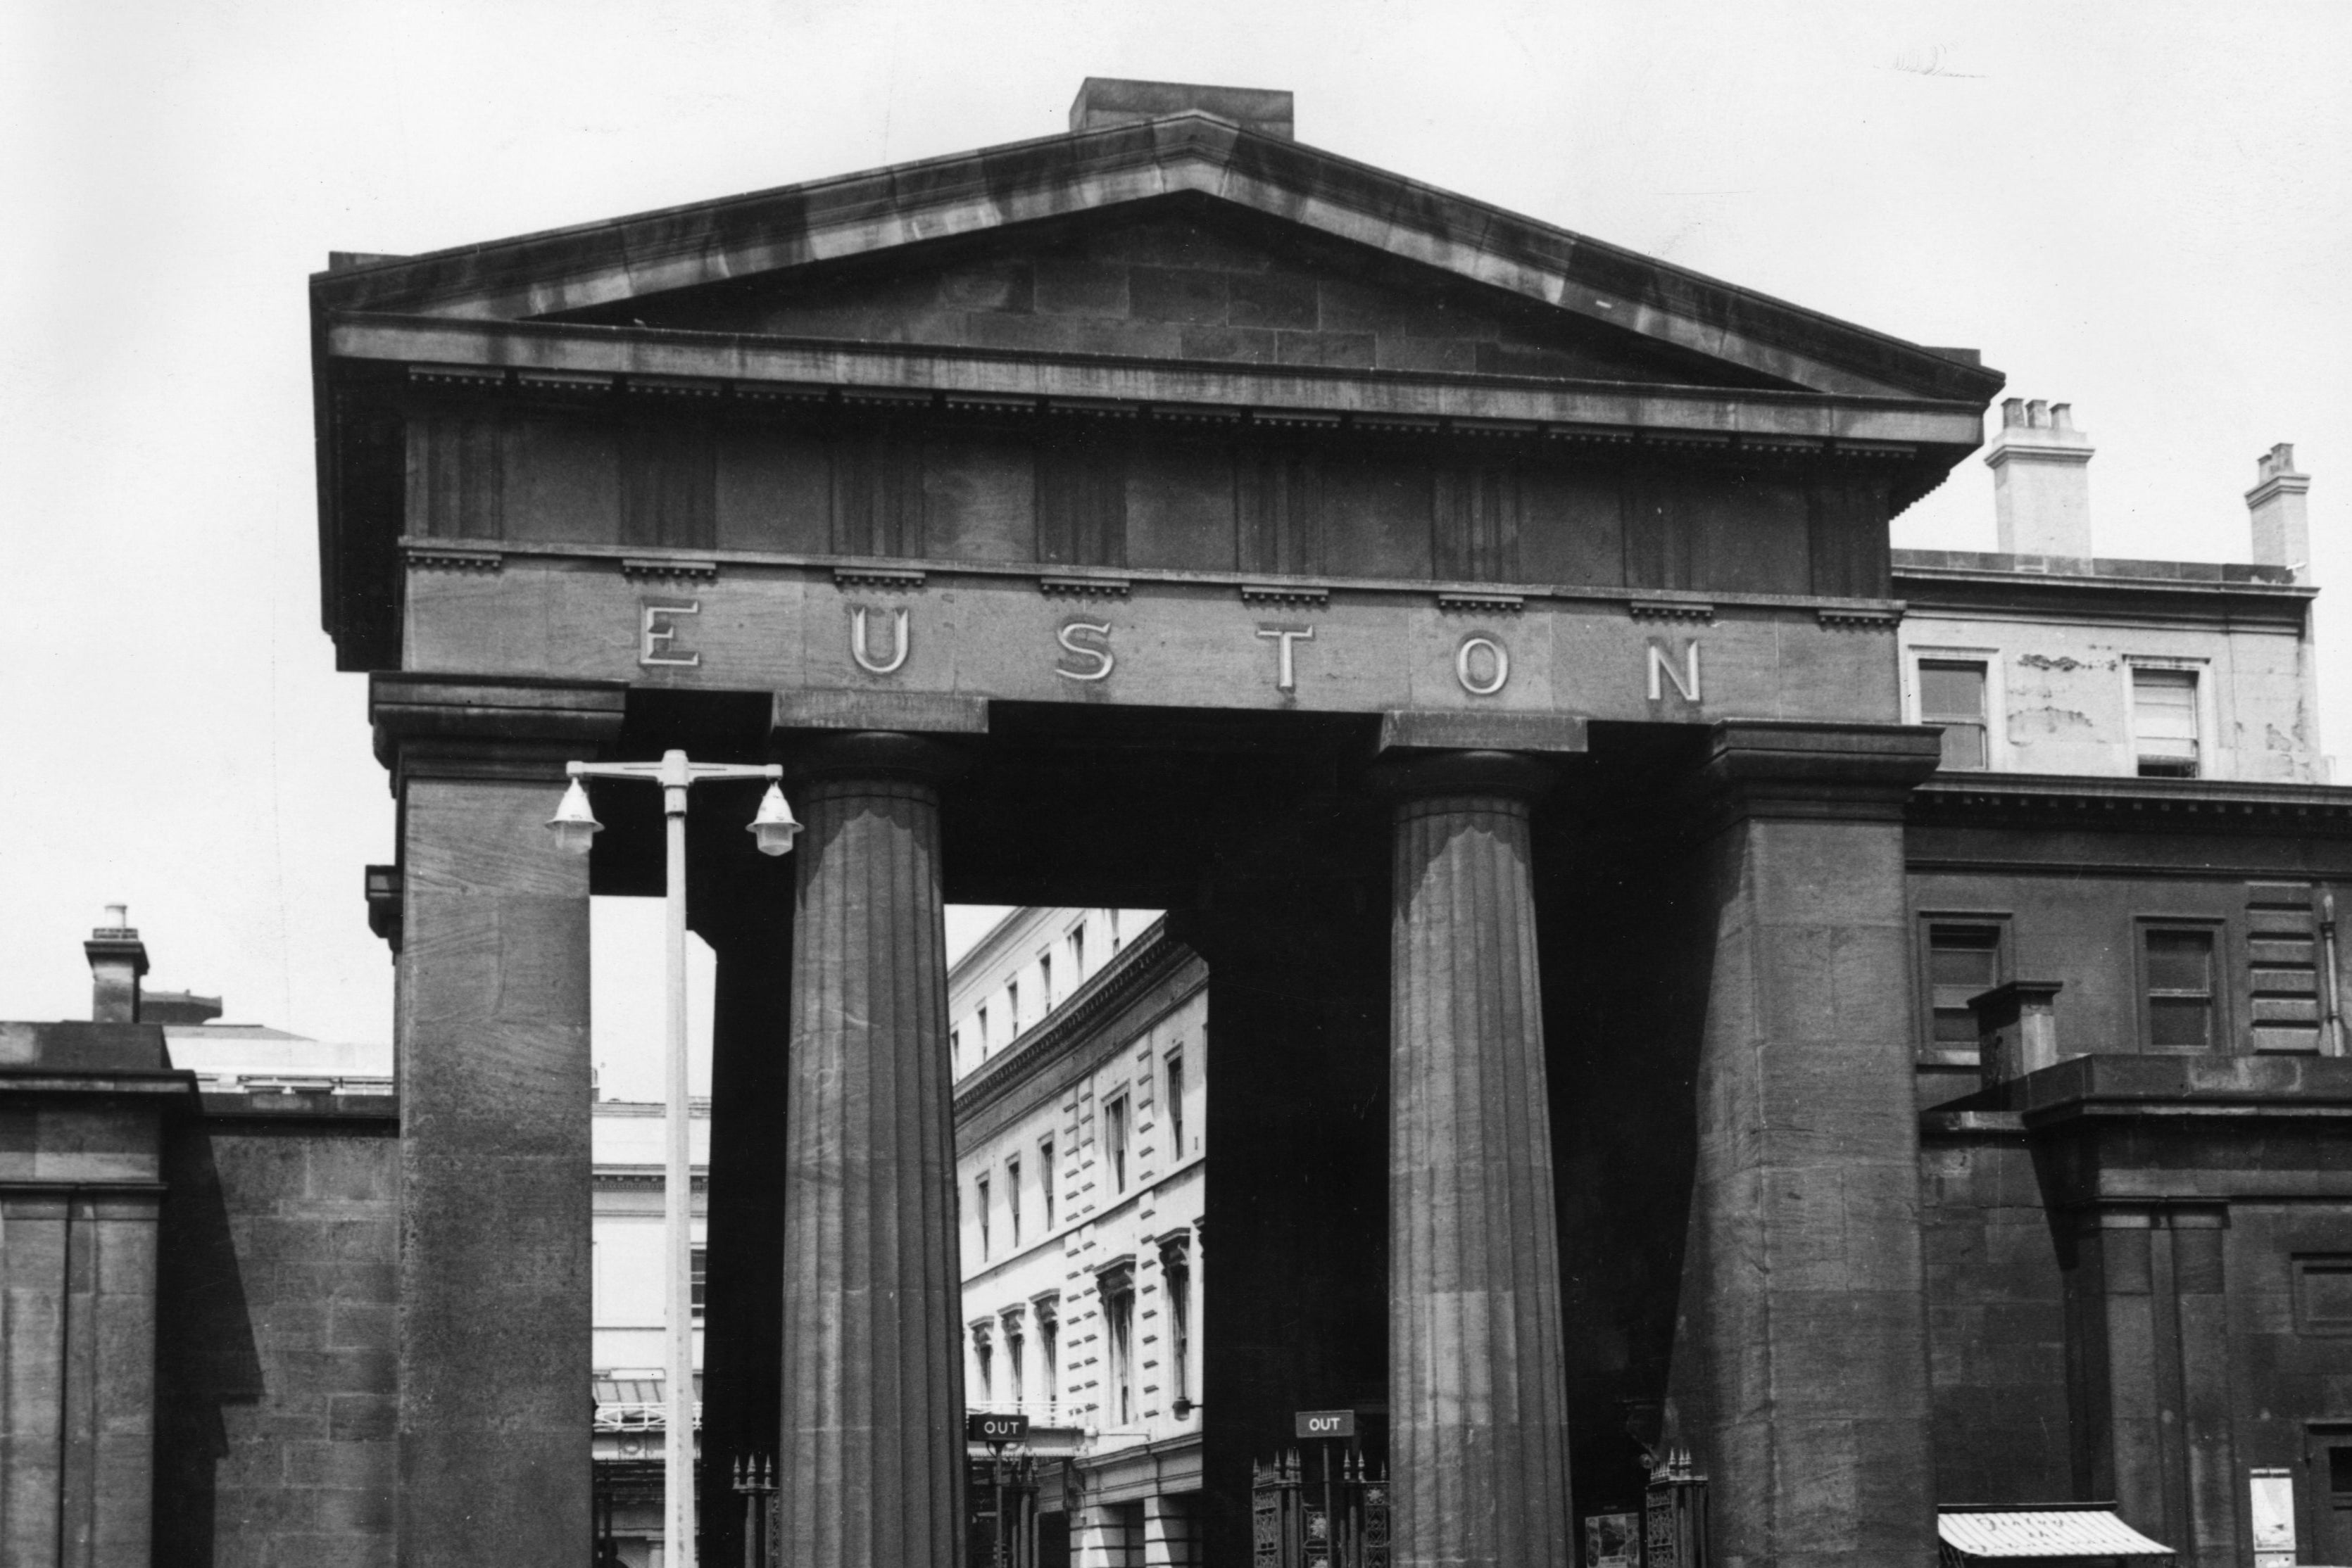 Demolished: the Euston Arch was knocked down in the Sixties